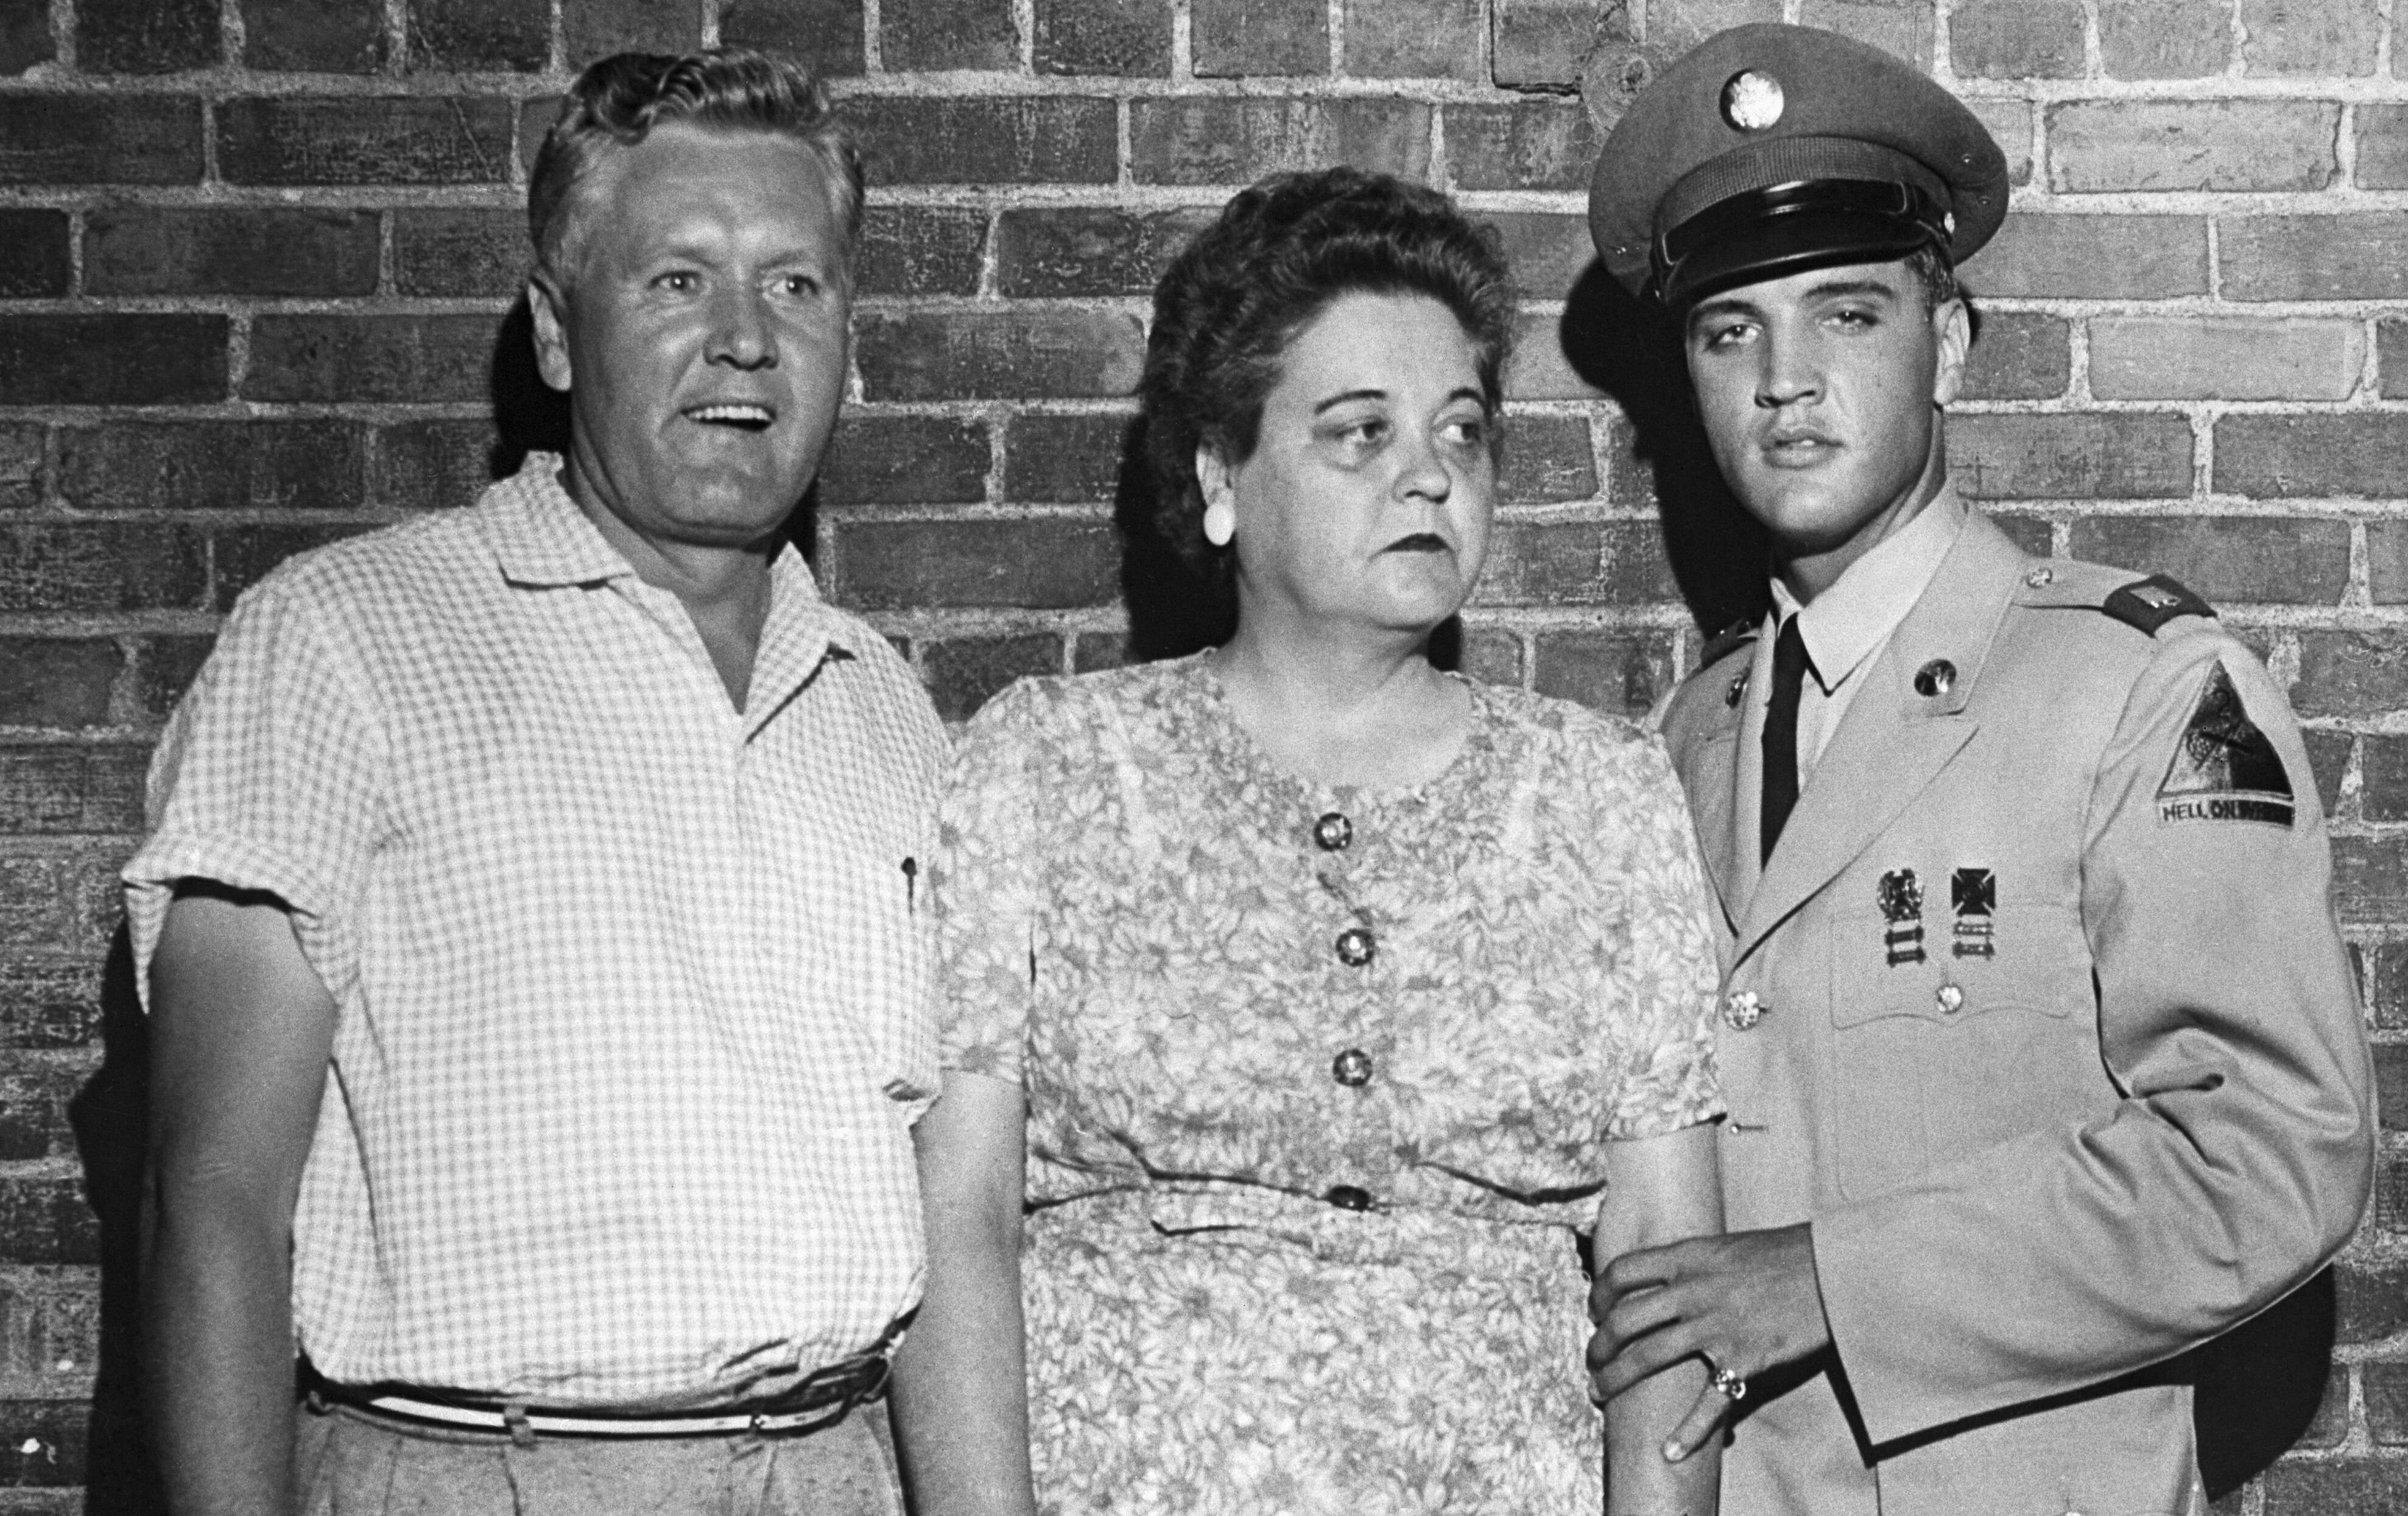 Elvis Presley, on his first leave from the Army, escorts his parents, Mr. and Mrs. Presley. | Source: Getty Images